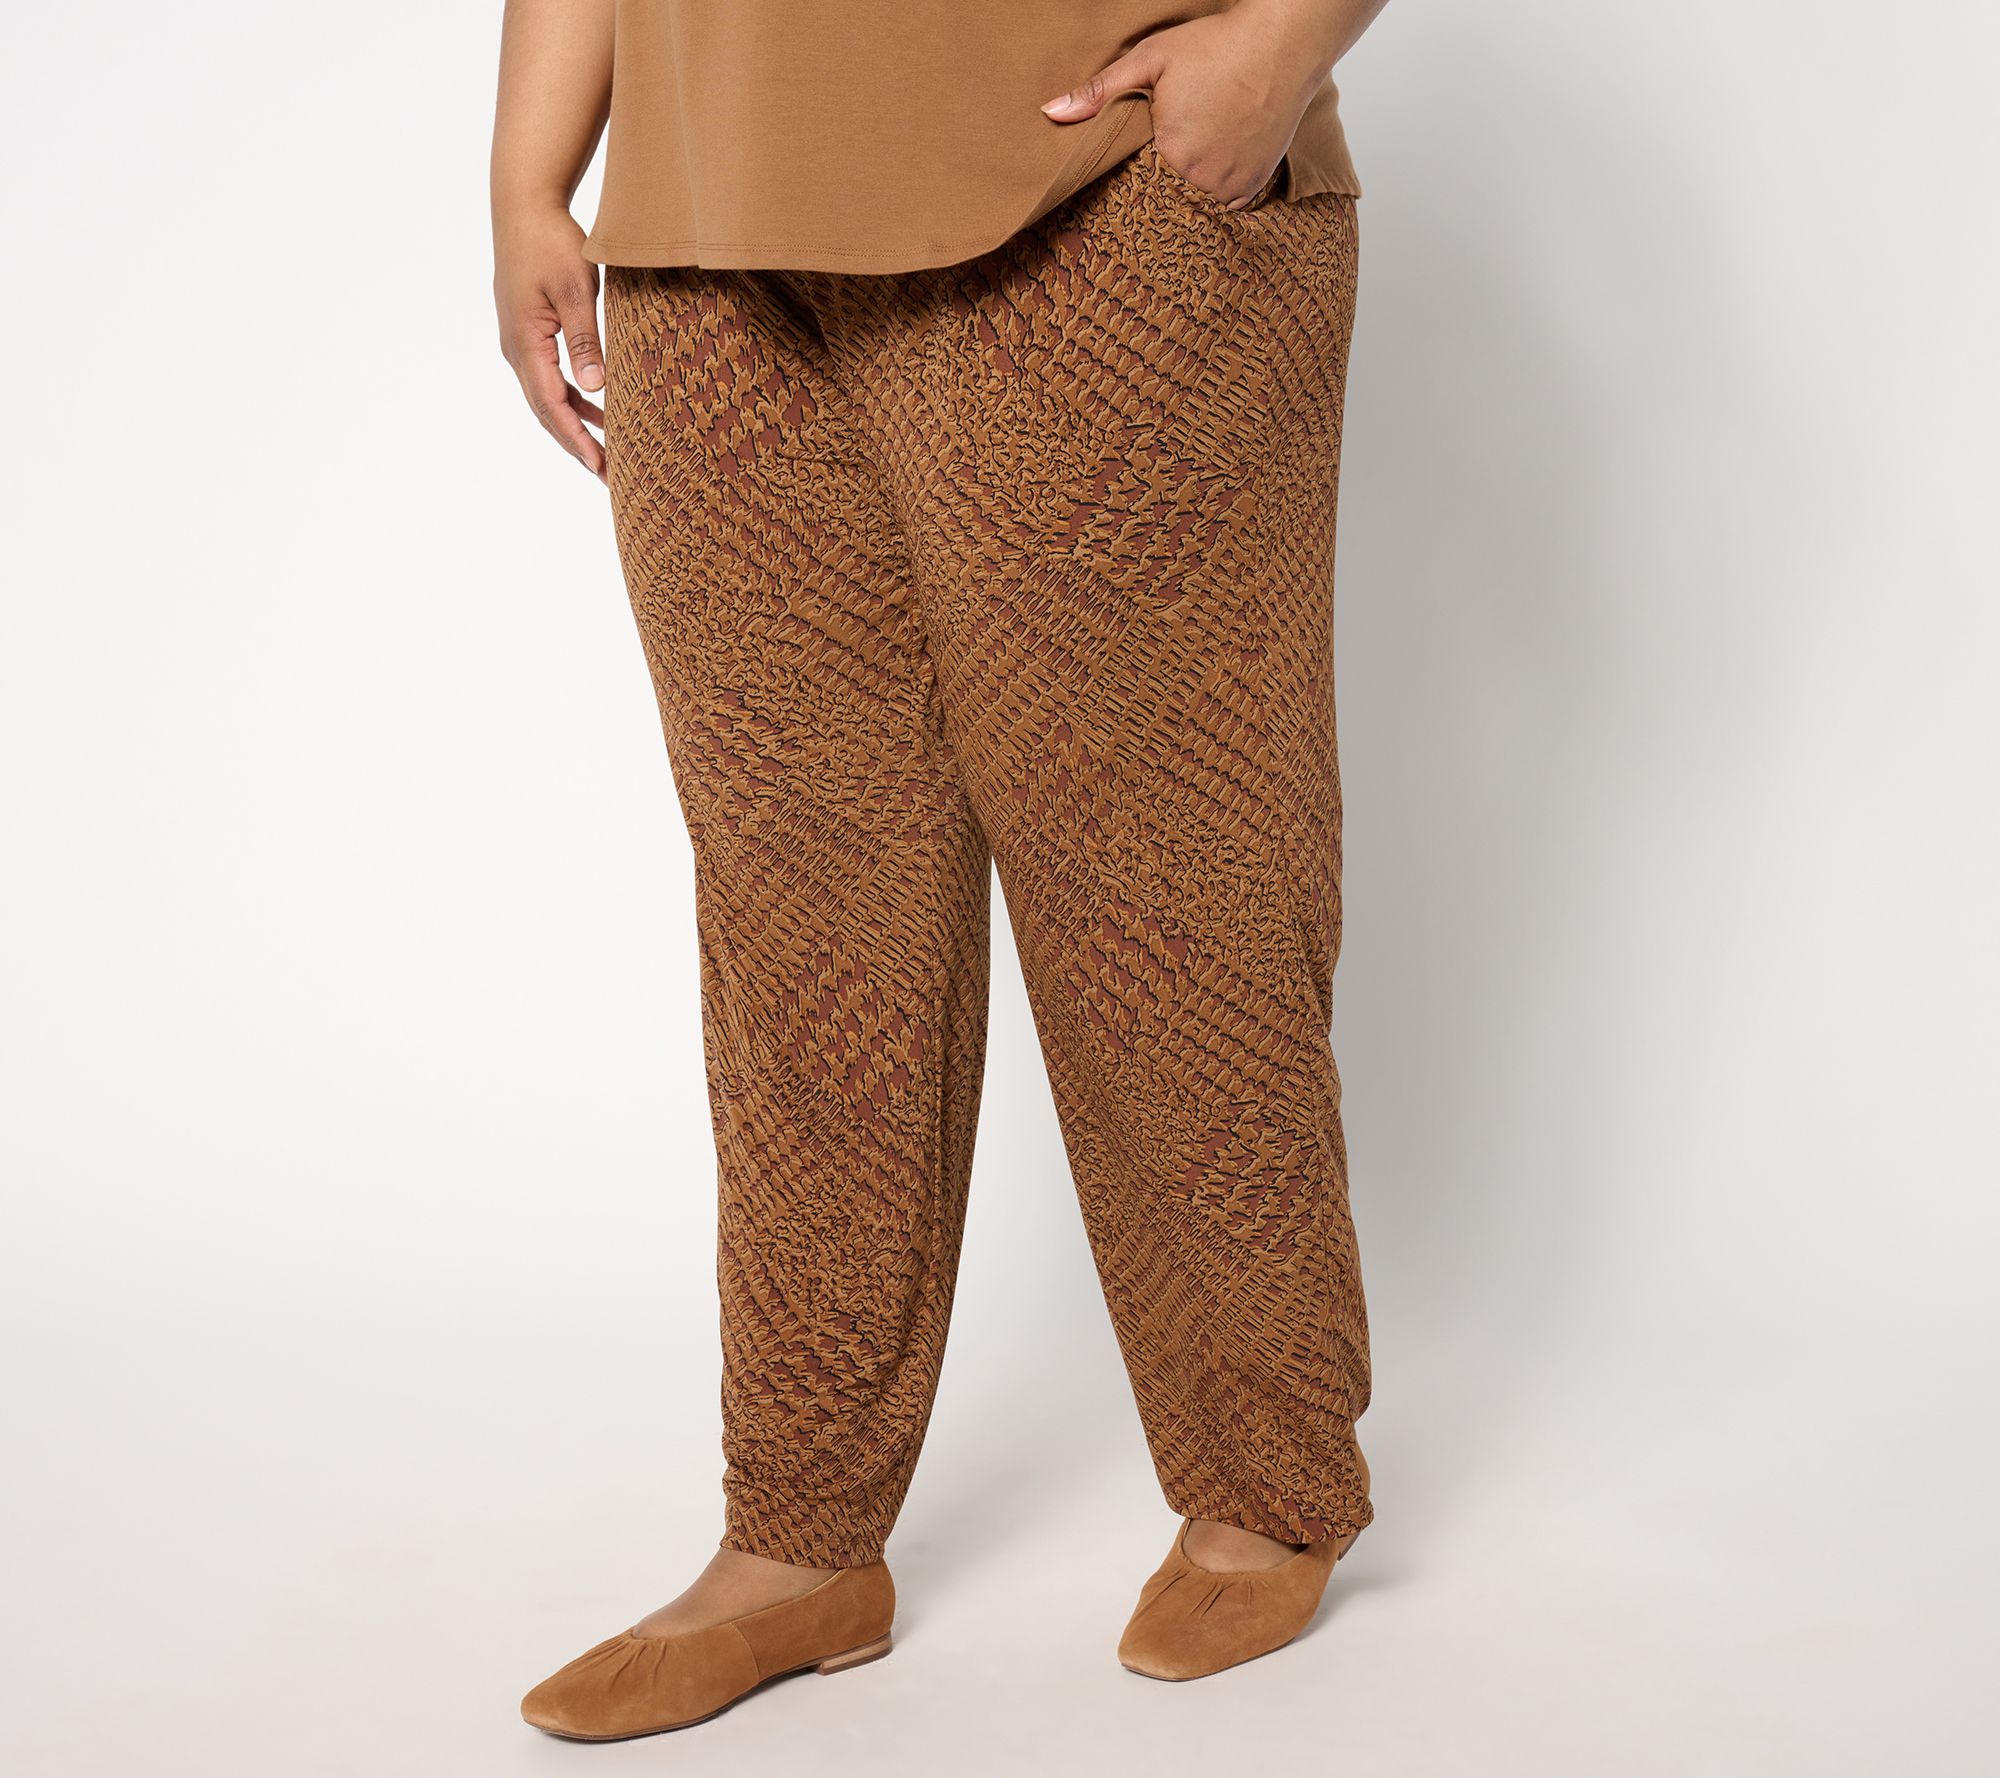 Susan Graver - Warm up your summer wardrobe ☀️ with a liquid knit top &  printed culottes. To shop the look: Liquid Knit Top (A501351):   Printed Culotte Pants (A545833):  We're